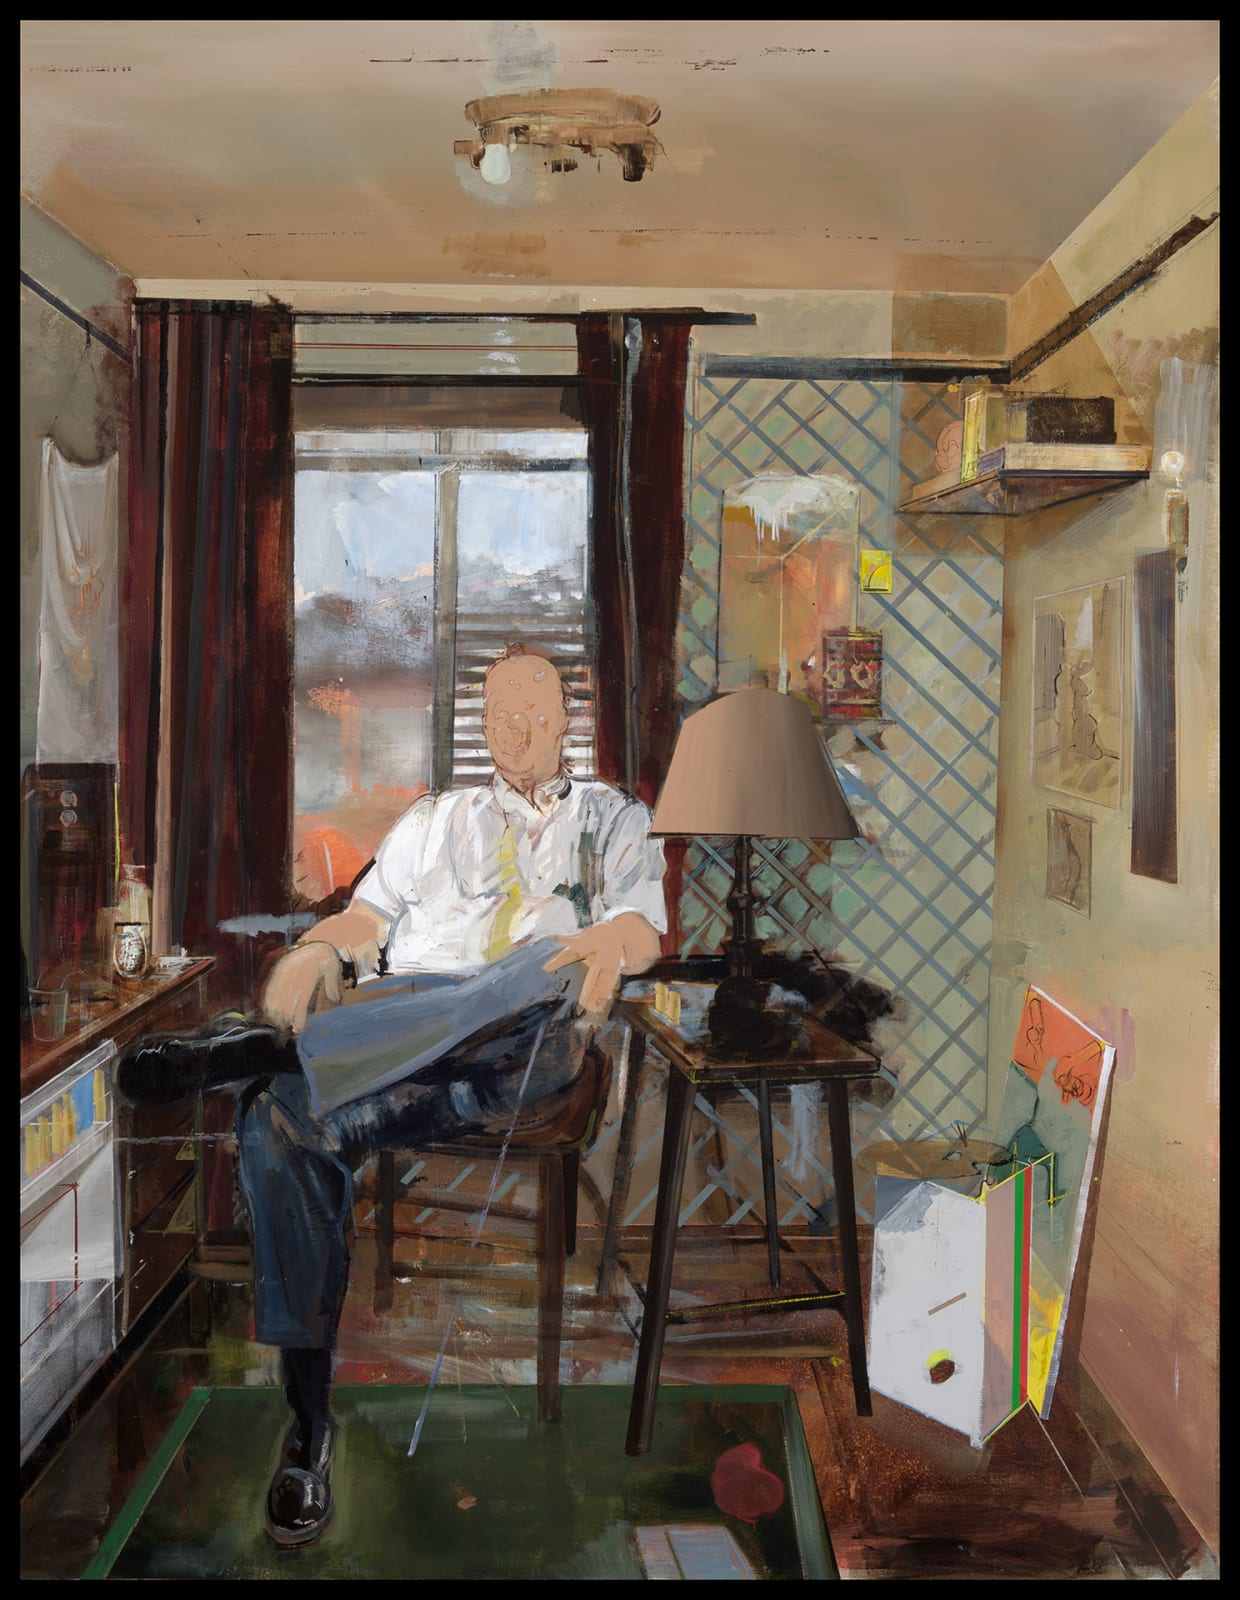 Robert Weiss, Man In A Room (The Syracuse Years), 2019